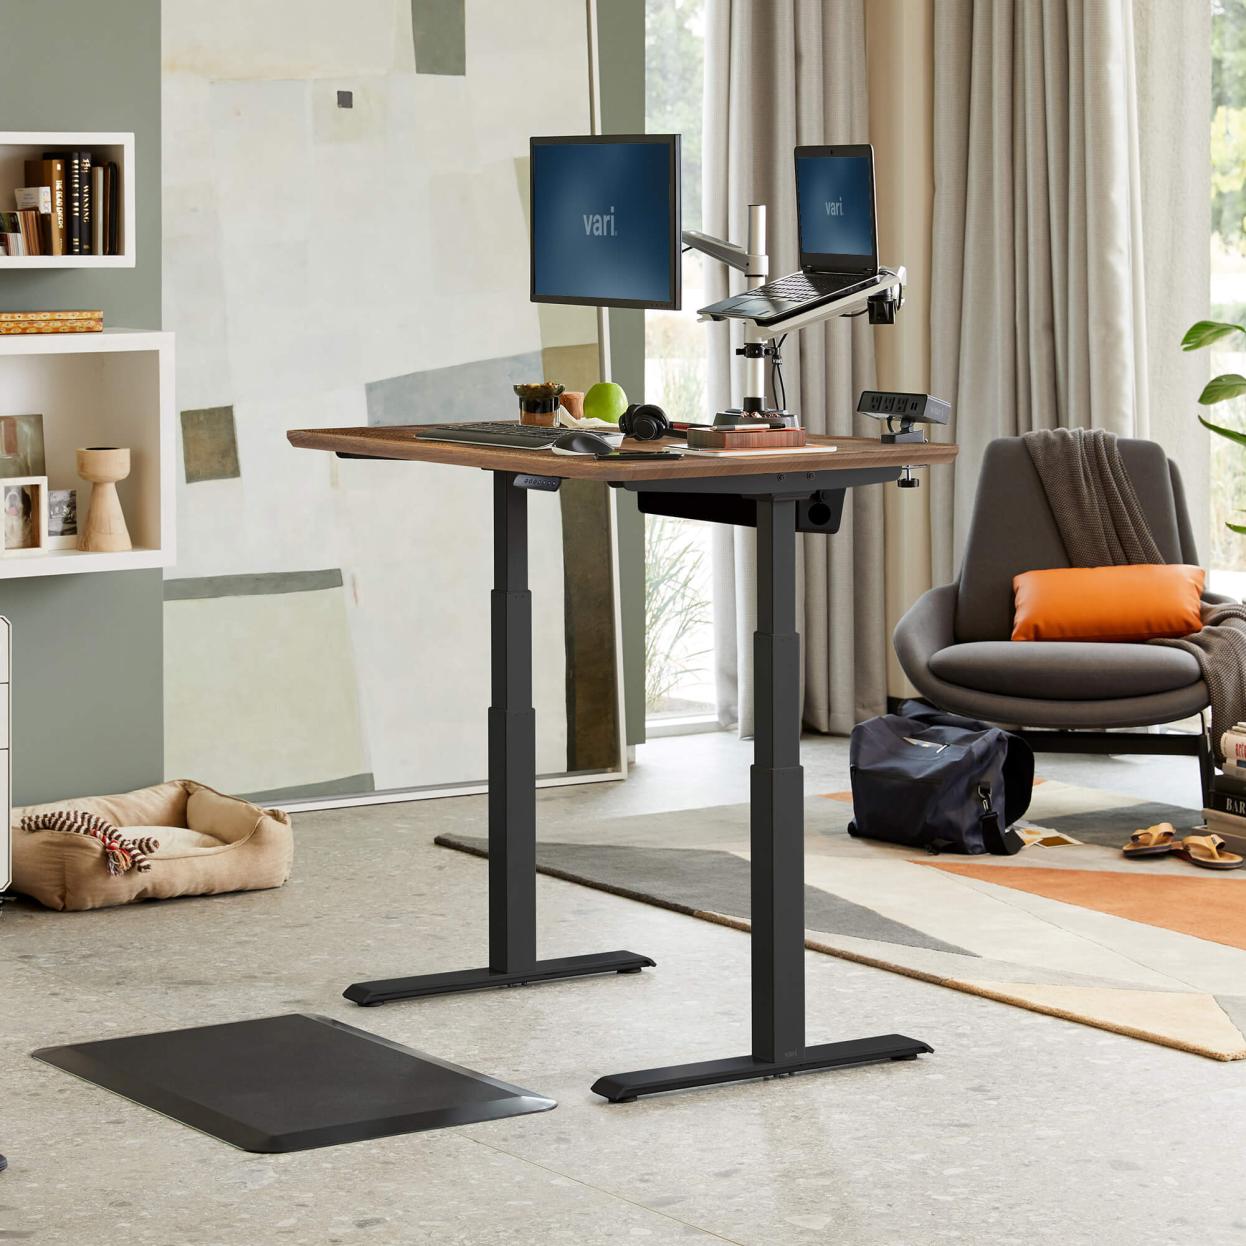 How Can I Transition to a Standing Desk Safely?